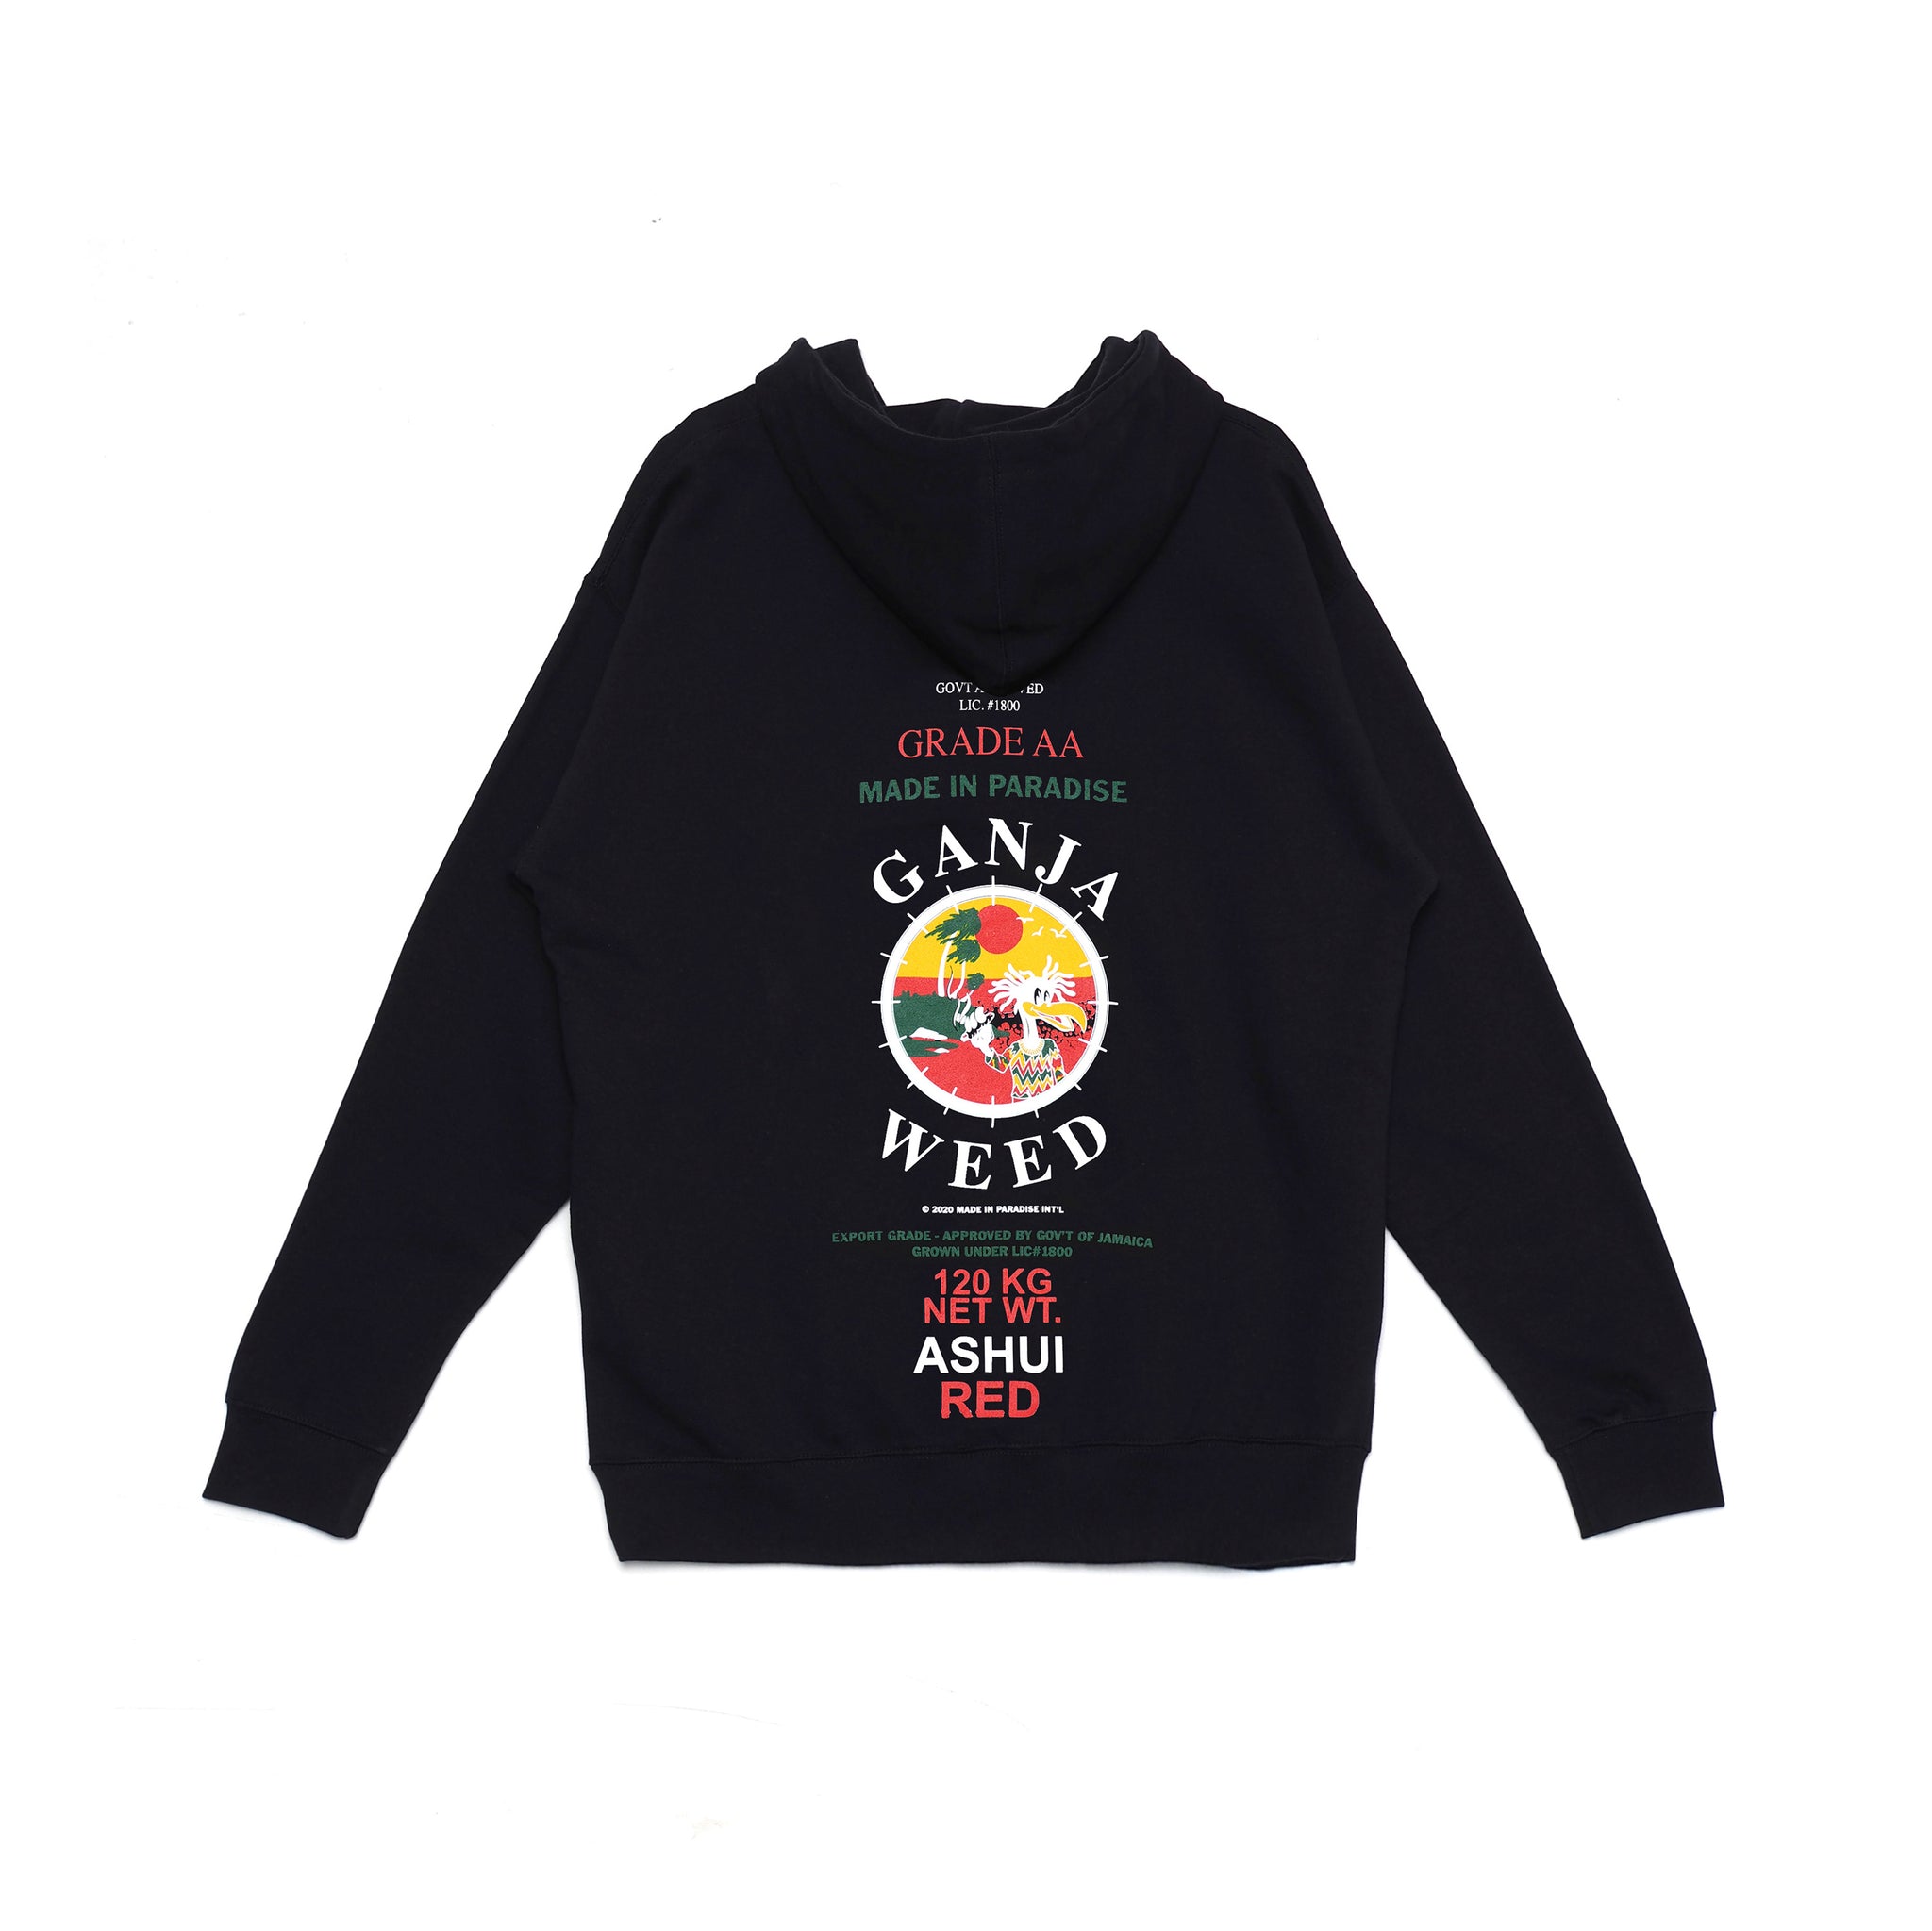 Back view of Made in Paradise Homegrown Collection "EXPORT STANDARD" black hoodie